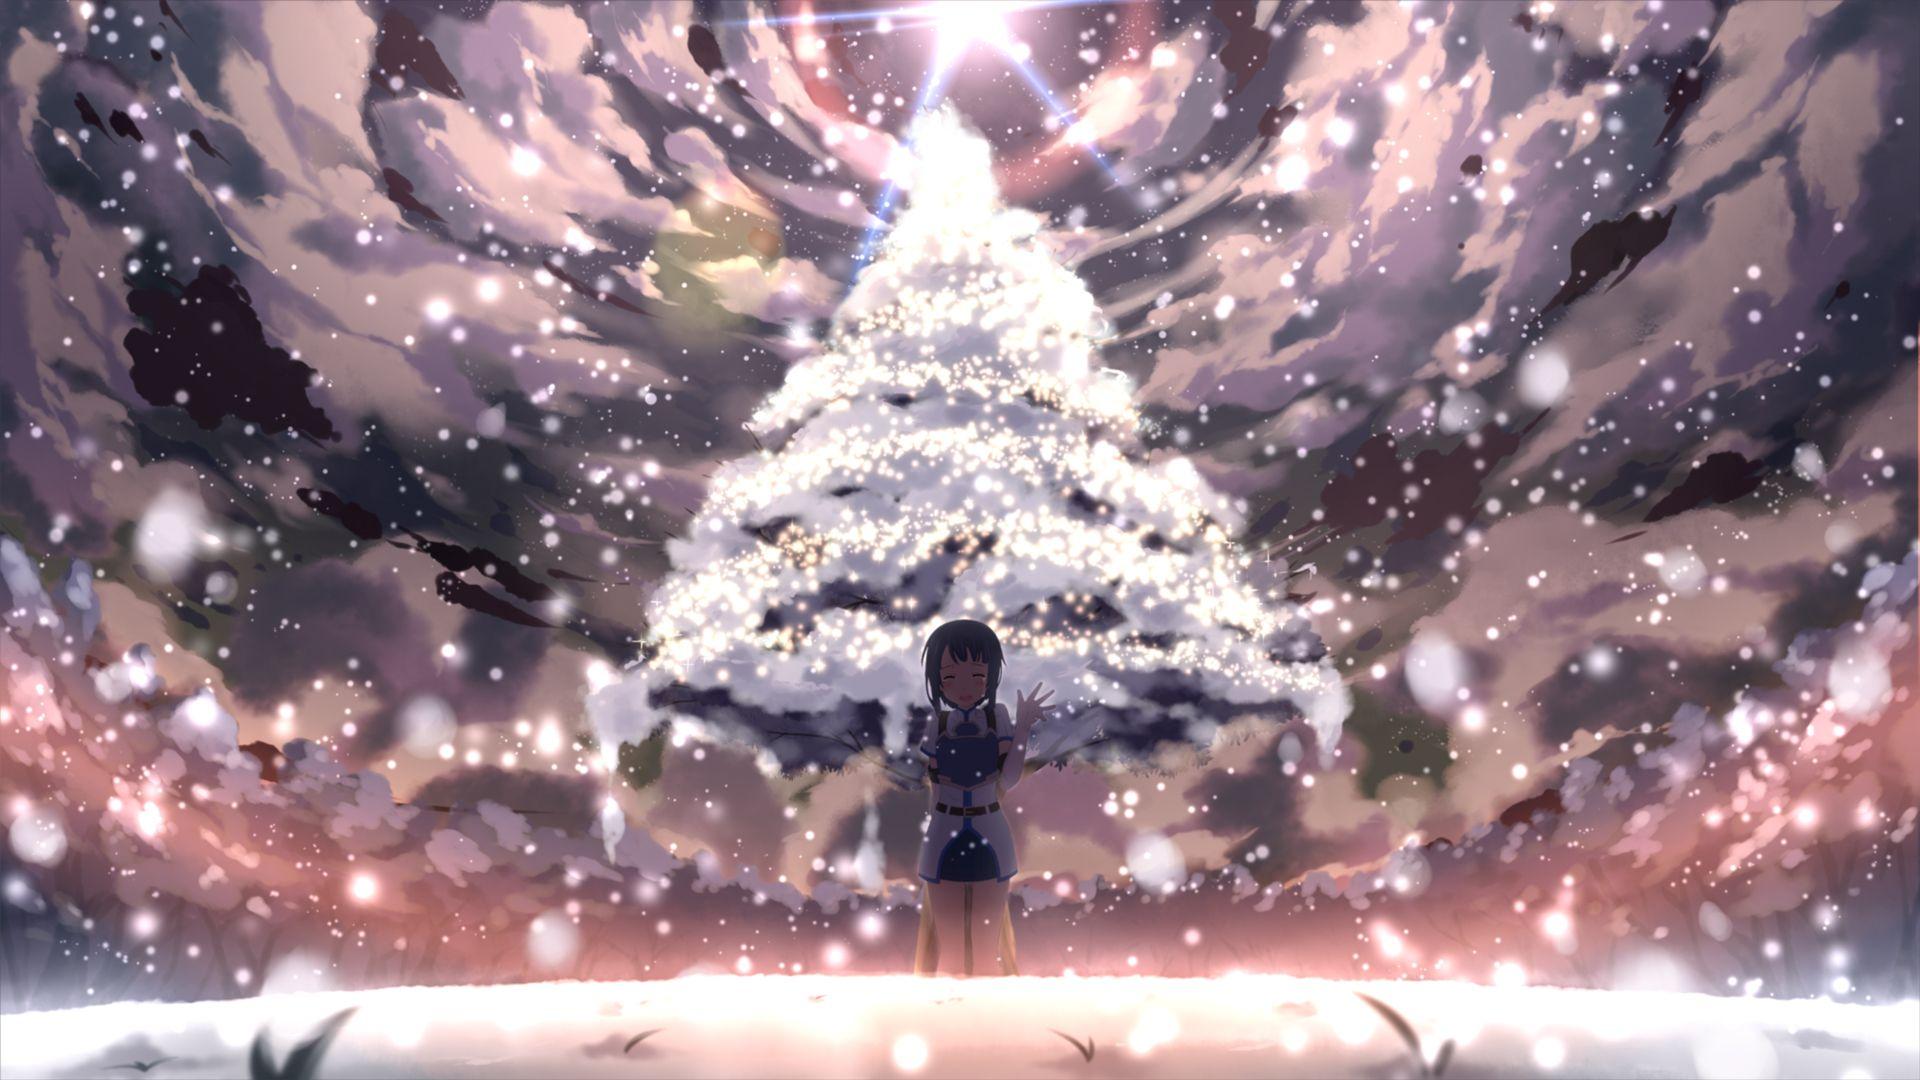 My Collection of Christmas/Winter Anime Backgrounds